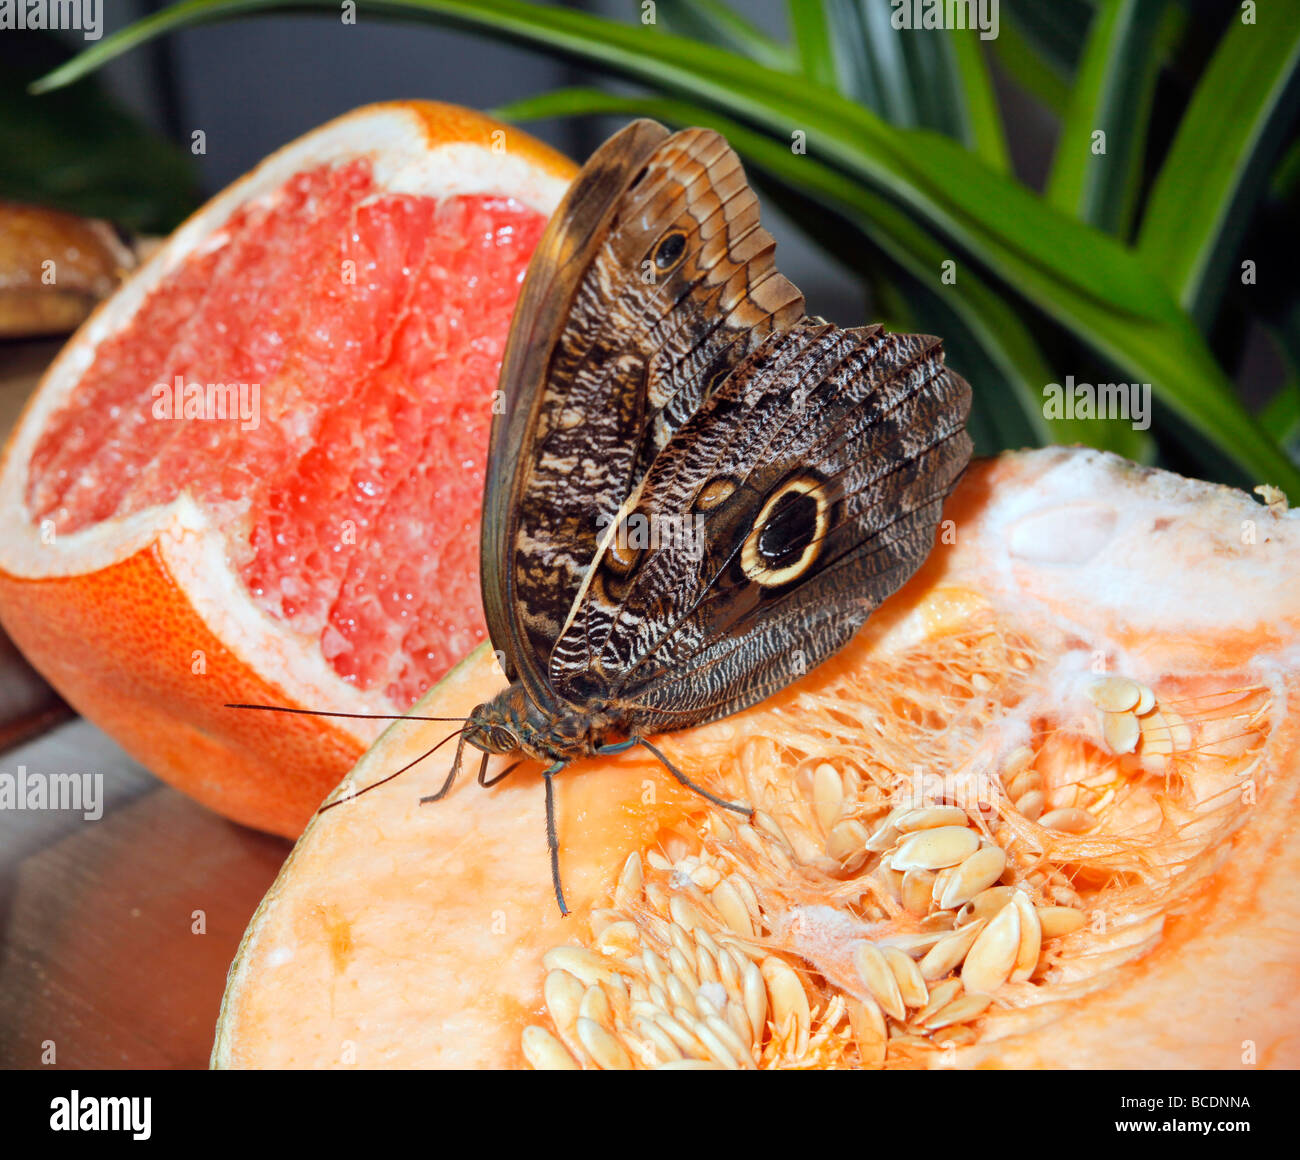 giant owl butterfly, Amazing Butterflies exhibition, Natural History Museum, Washington, DC, USA Stock Photo